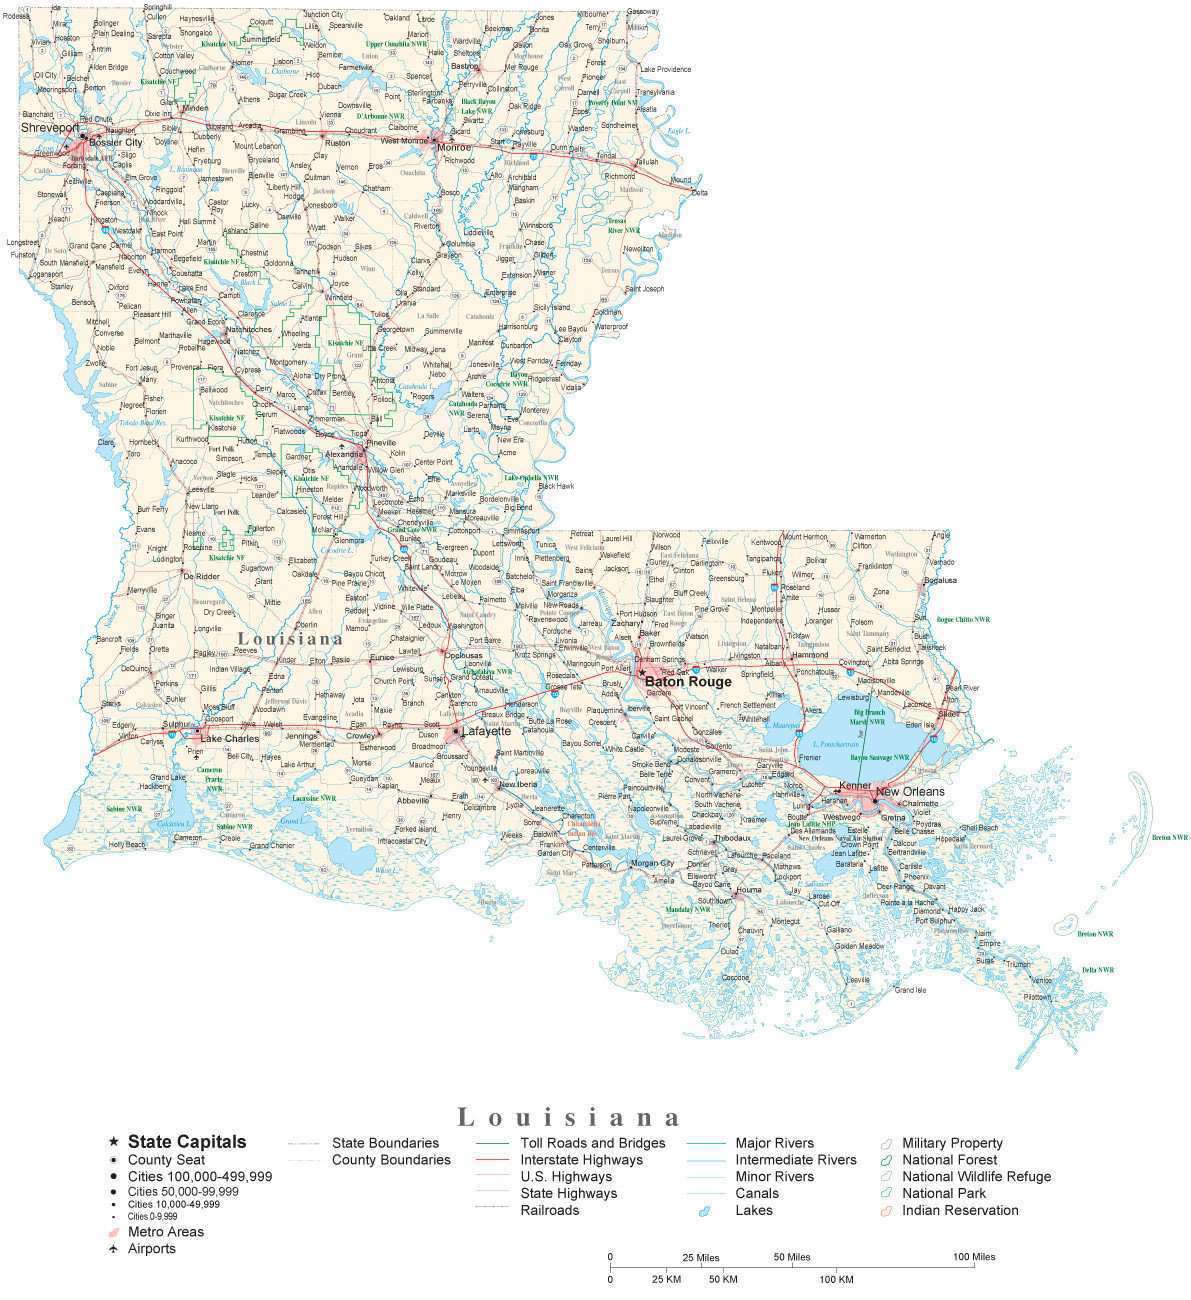 Louisiana Detailed Cut-Out Style State Map in Adobe Illustrator Vector Format. Detailed ...